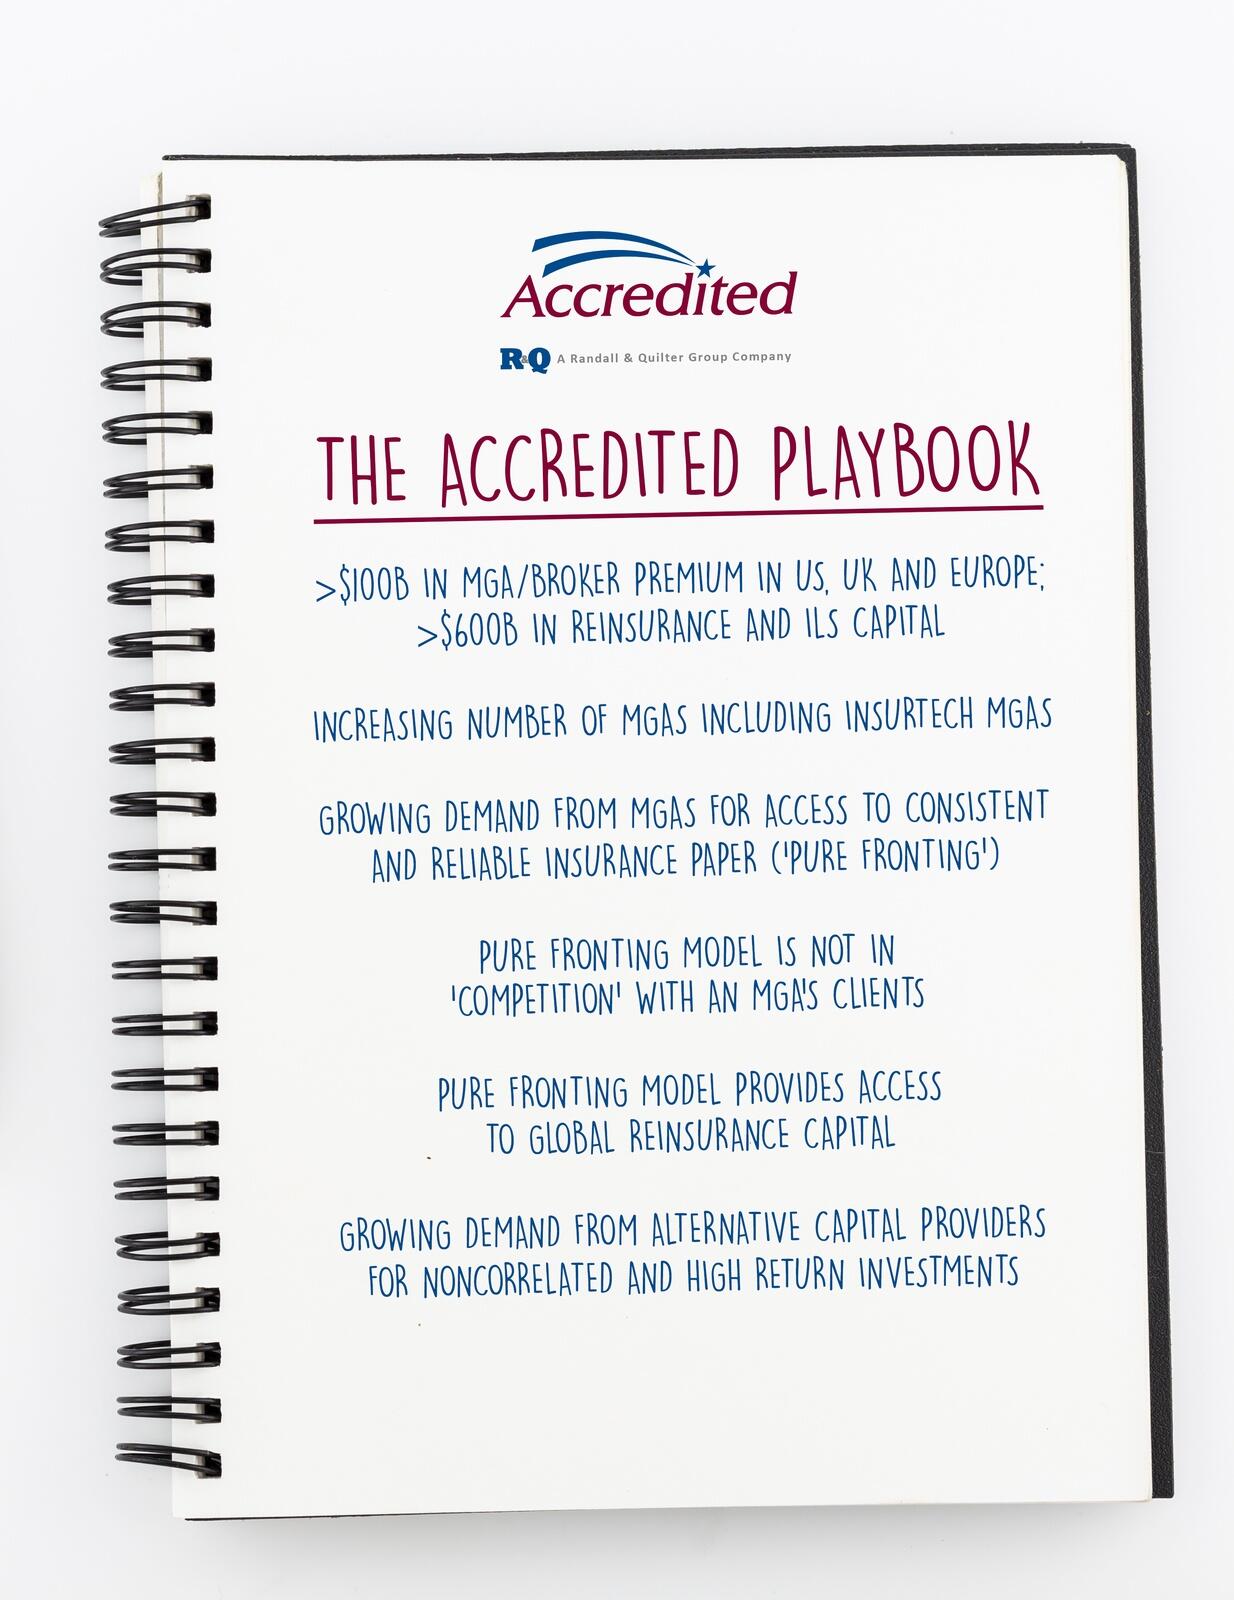 The Accredited playbook